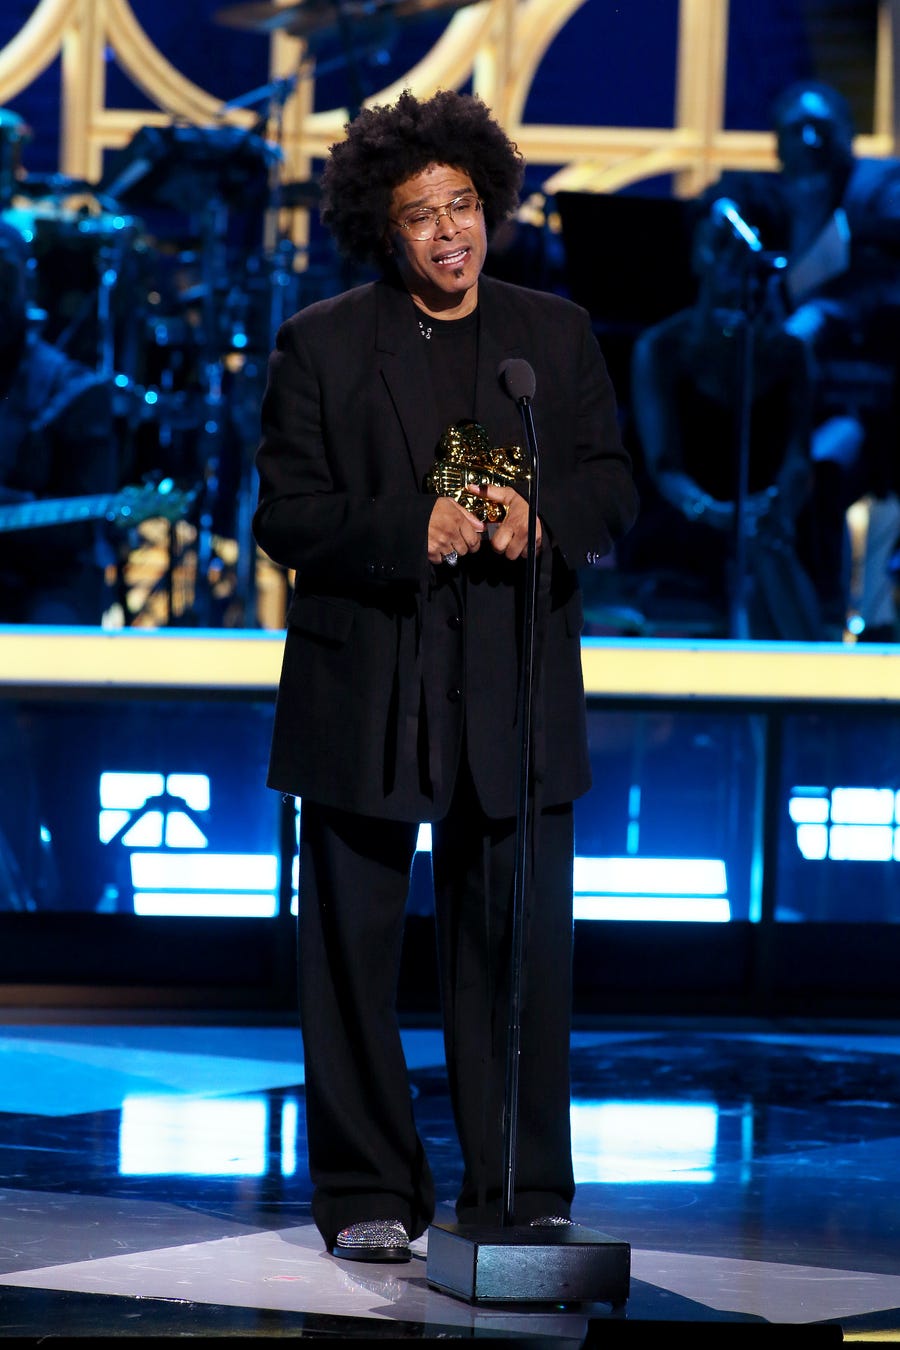 NEW YORK, NEW YORK - NOVEMBER 20: Maxwell accepts the Living Legend Award onstage at The 